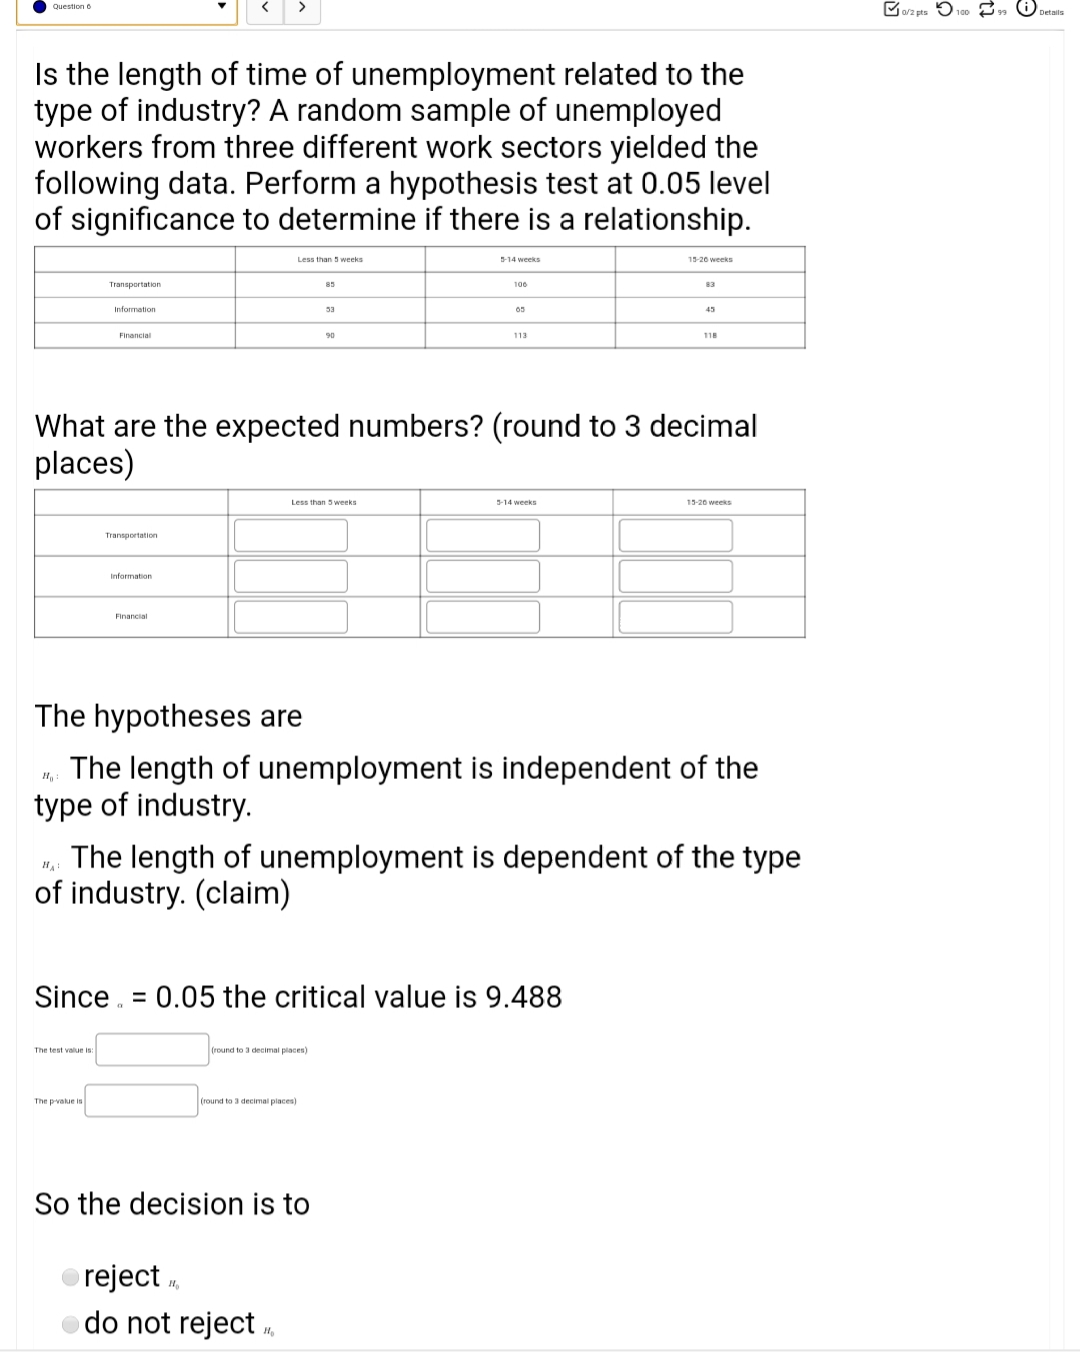 Is the length of time of unemployment related to the
type of industry? A random sample of unemployed
workers from three different work sectors yielded the
following data. Perform a hypothesis test at 0.05 level
of significance to determine if there is a relationship.
Less than 5 weeks
14 weeks
15-20 weeks
Transportation
100
Information
45
Financial
90
113
118
